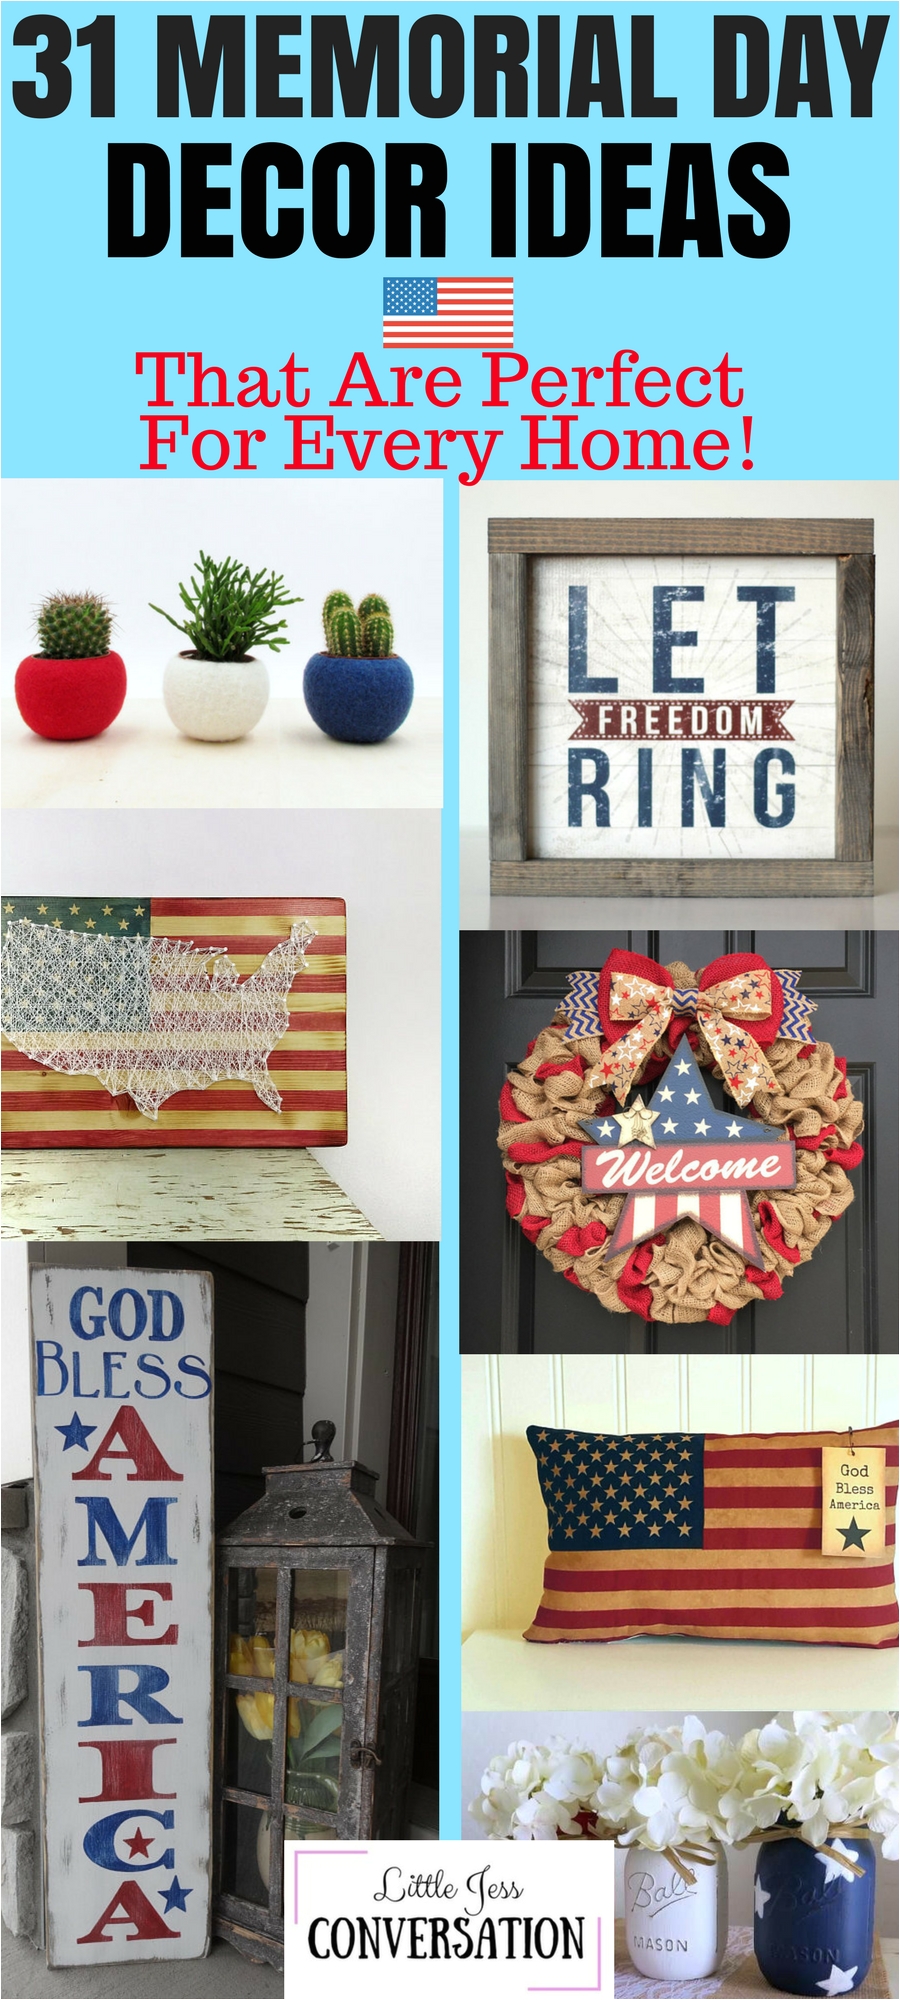 31 ideas for memorial day decor that is perfect for every home holidays america